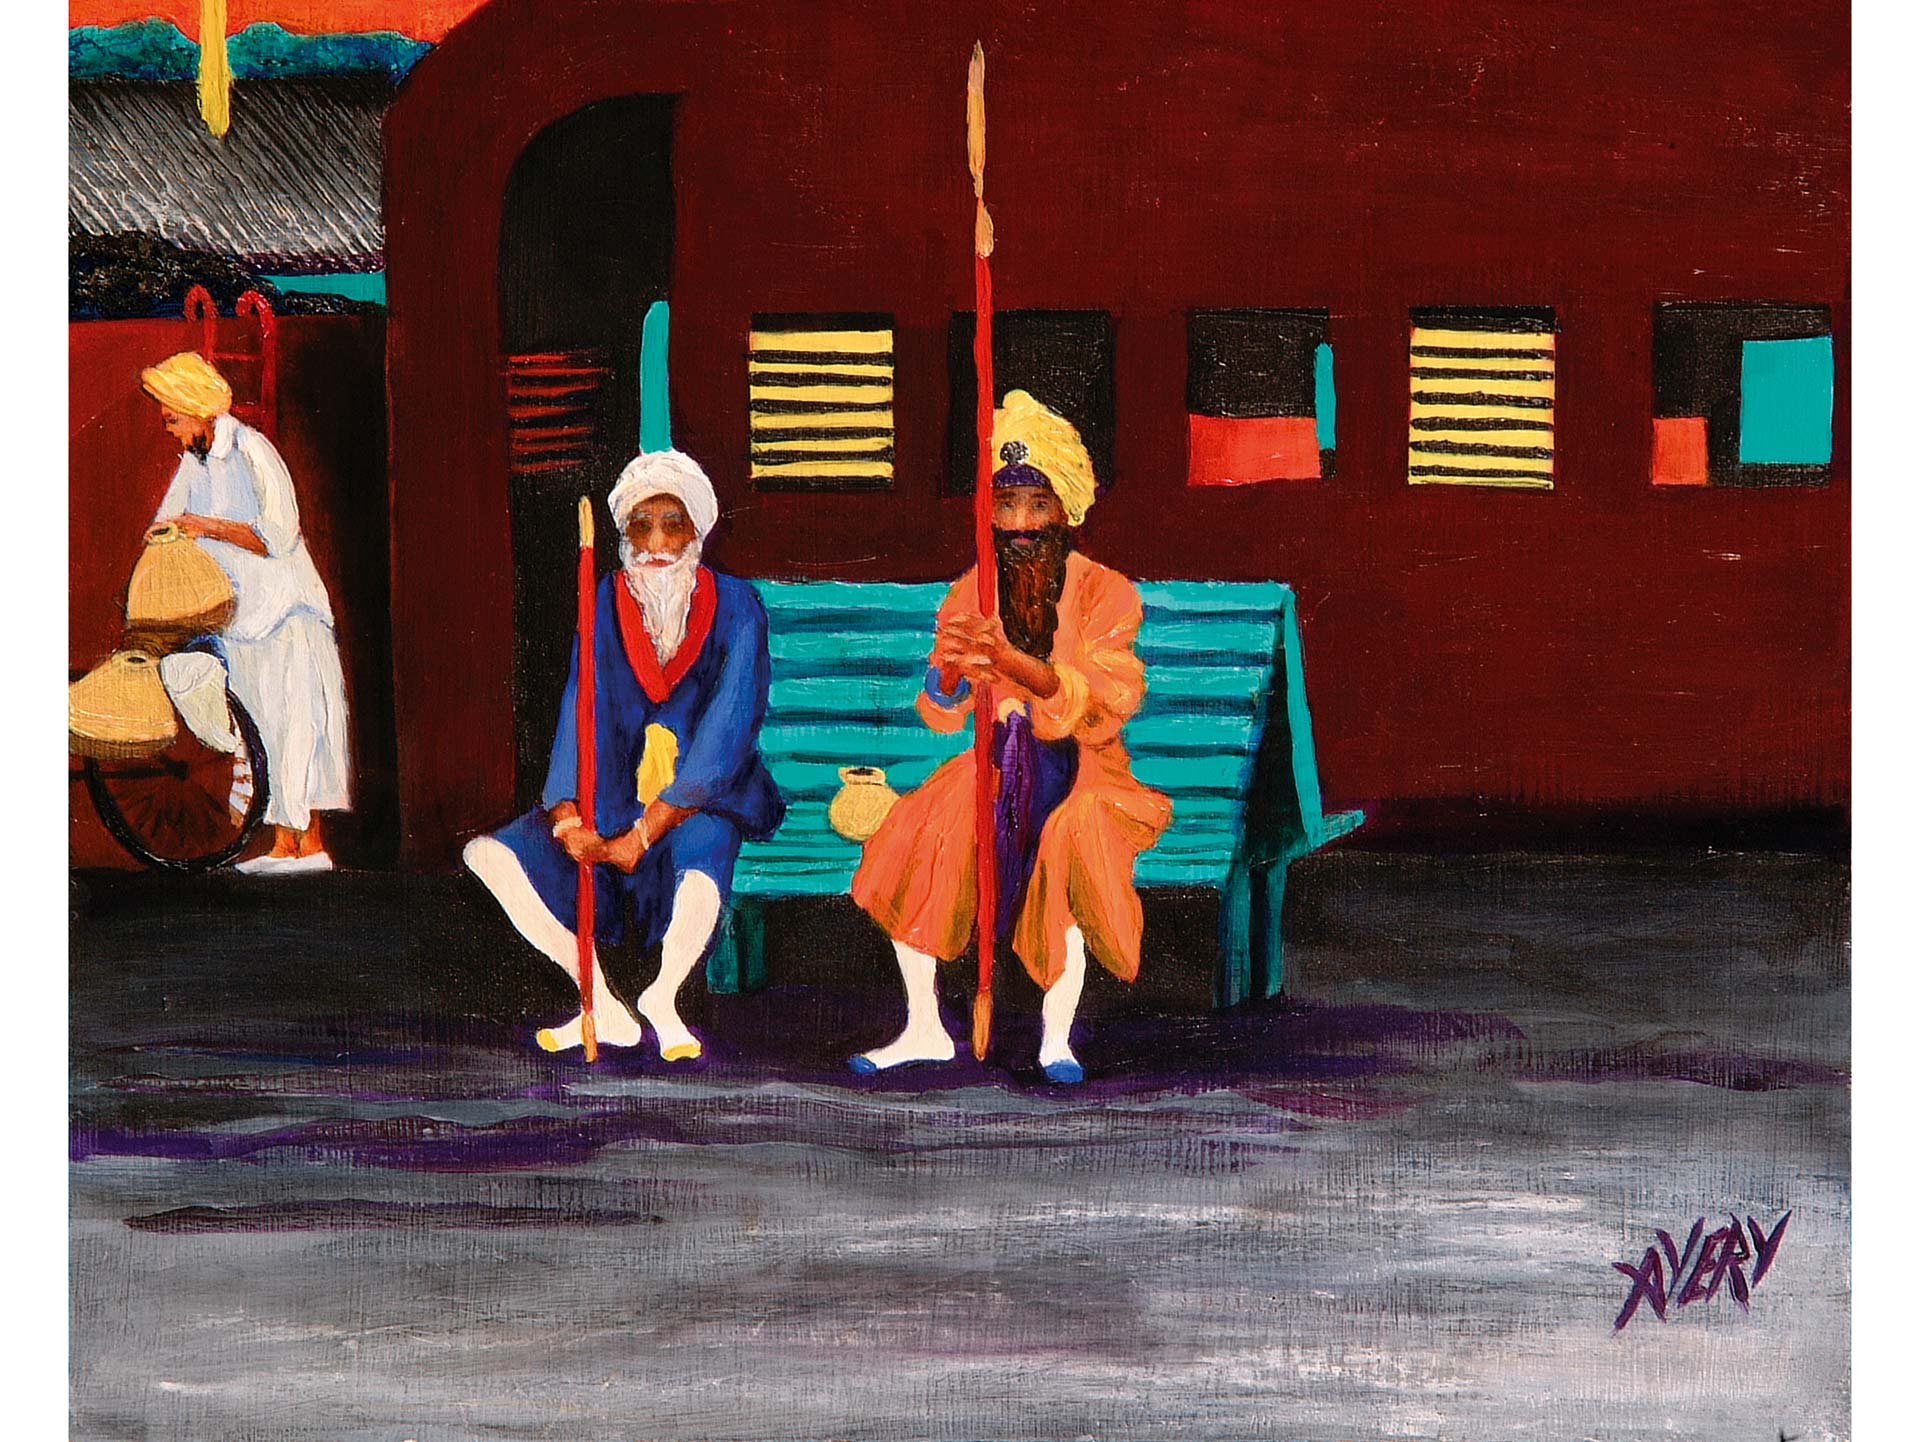 Lauren Avery Hutton | Aiming for Amritsar, oil on board, 19x16, 2003